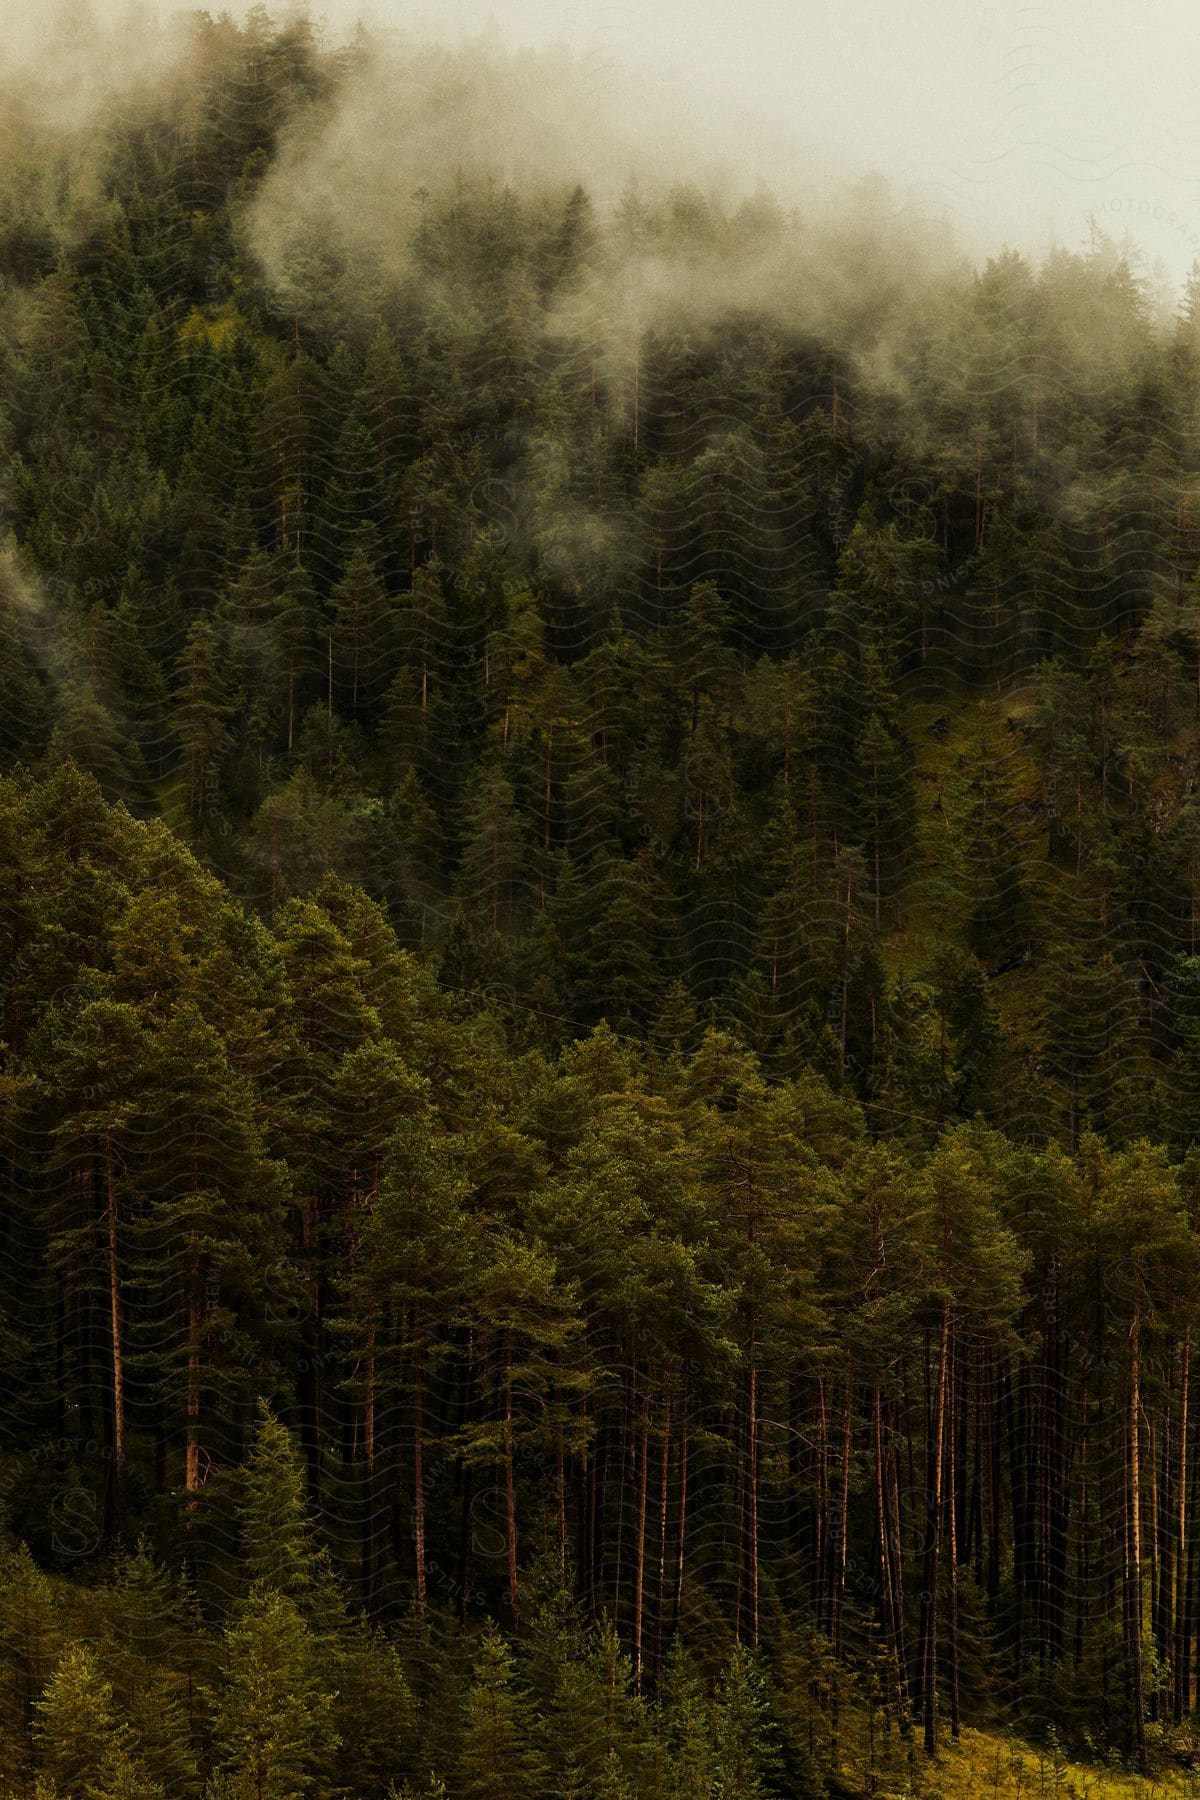 A dense forest of tall trees and there is some fog on top of them